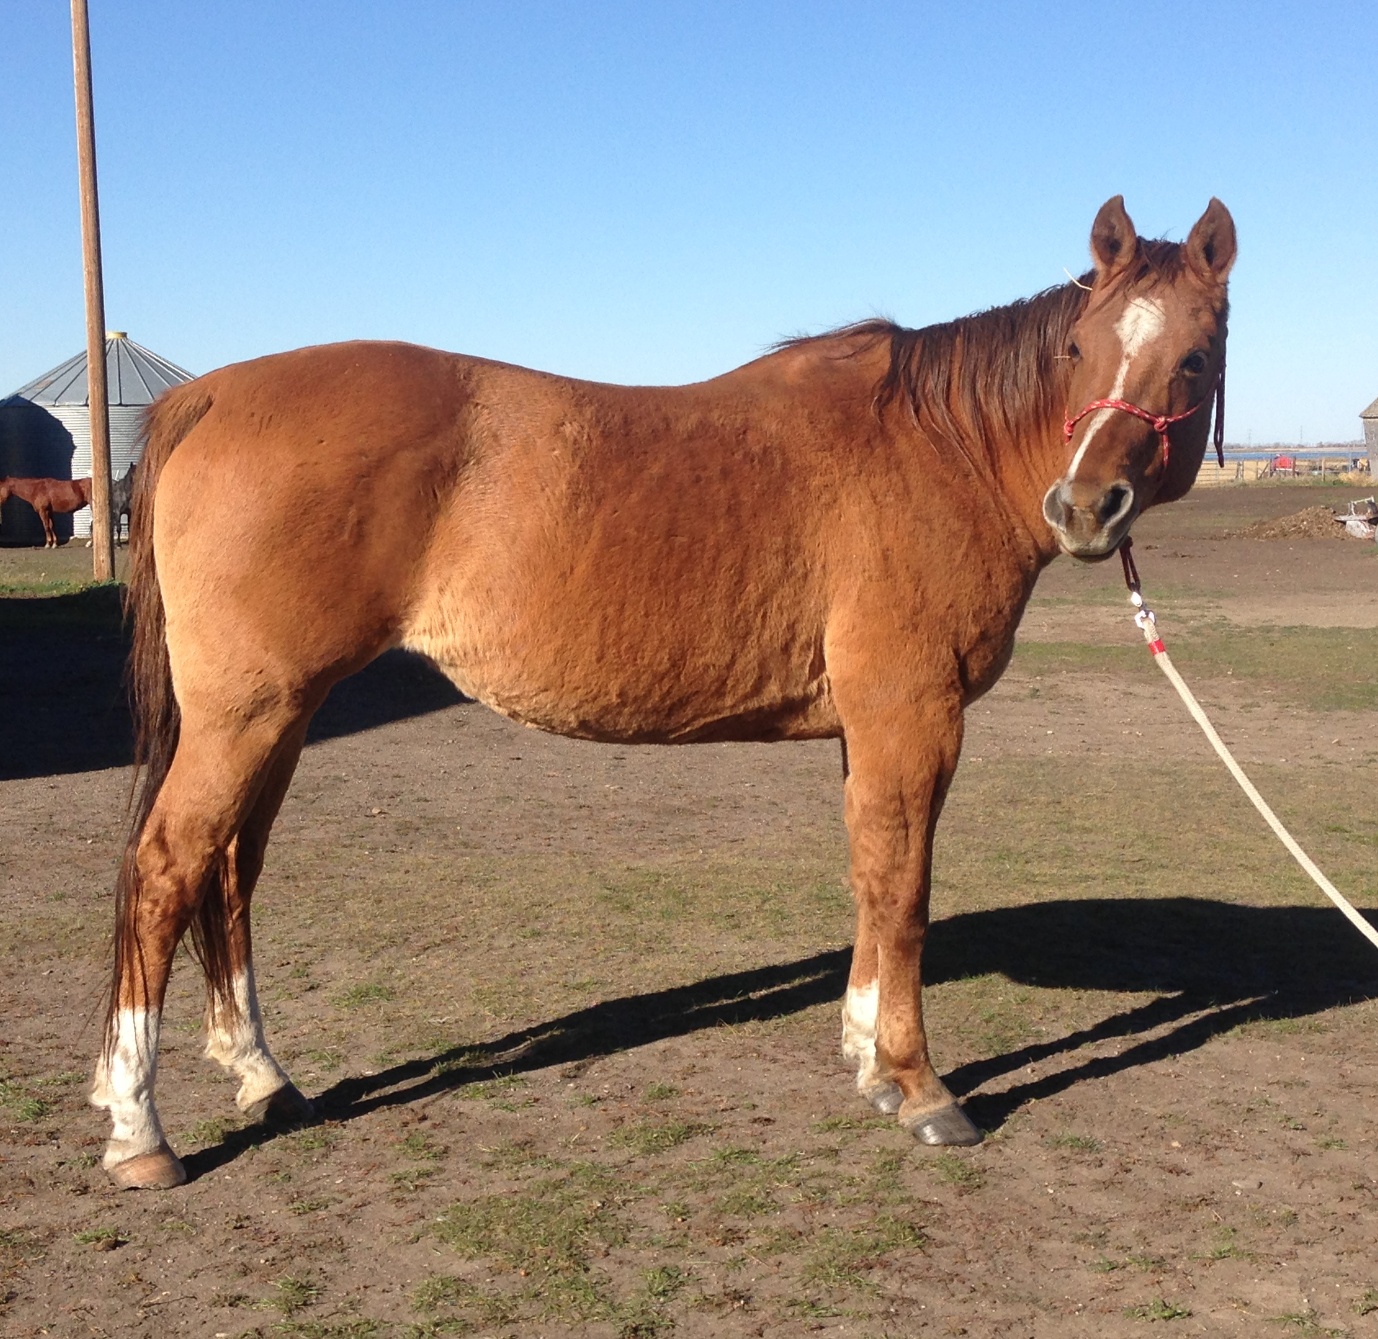 SAVANNA - Oct 14/16. She developed laminitis and the vet determined she also had internal problems that couldn't be cured. She was a sweet horse who had a rough life before coming to us.